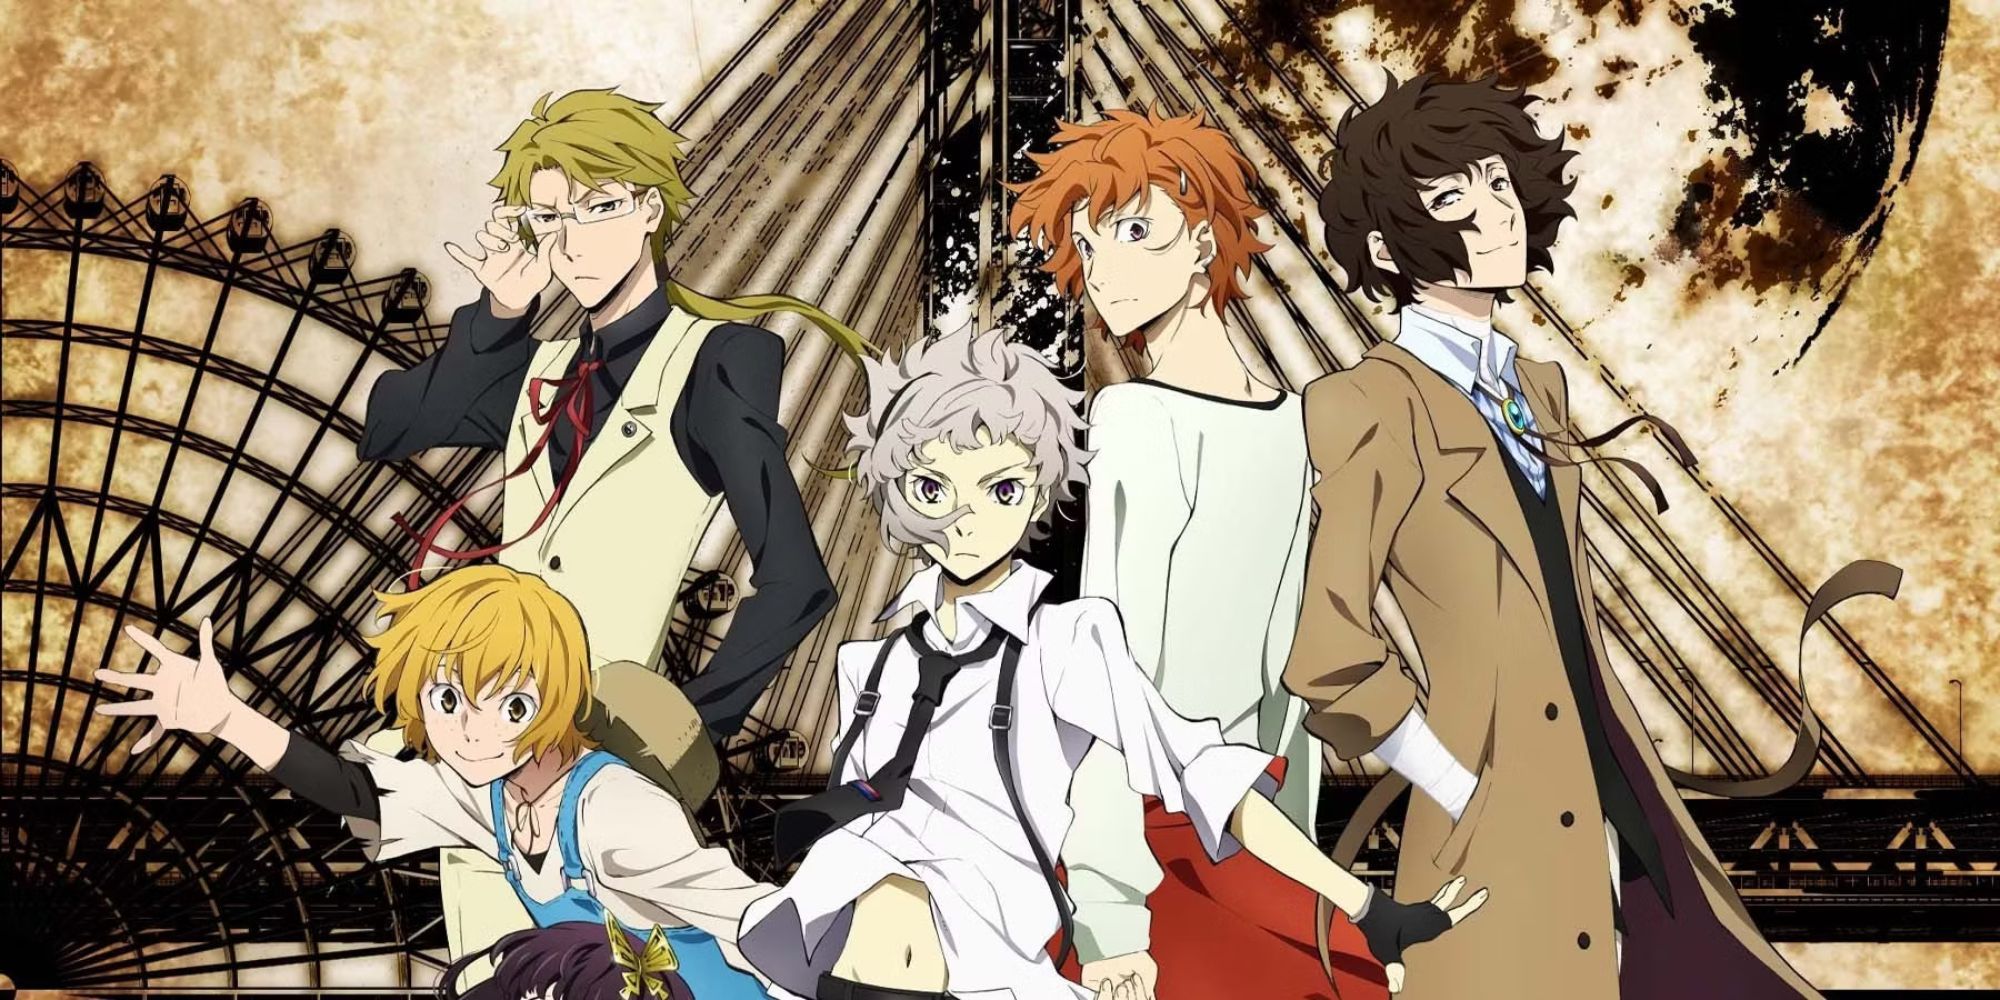 How to Watch Bungo Stray Dogs in Order